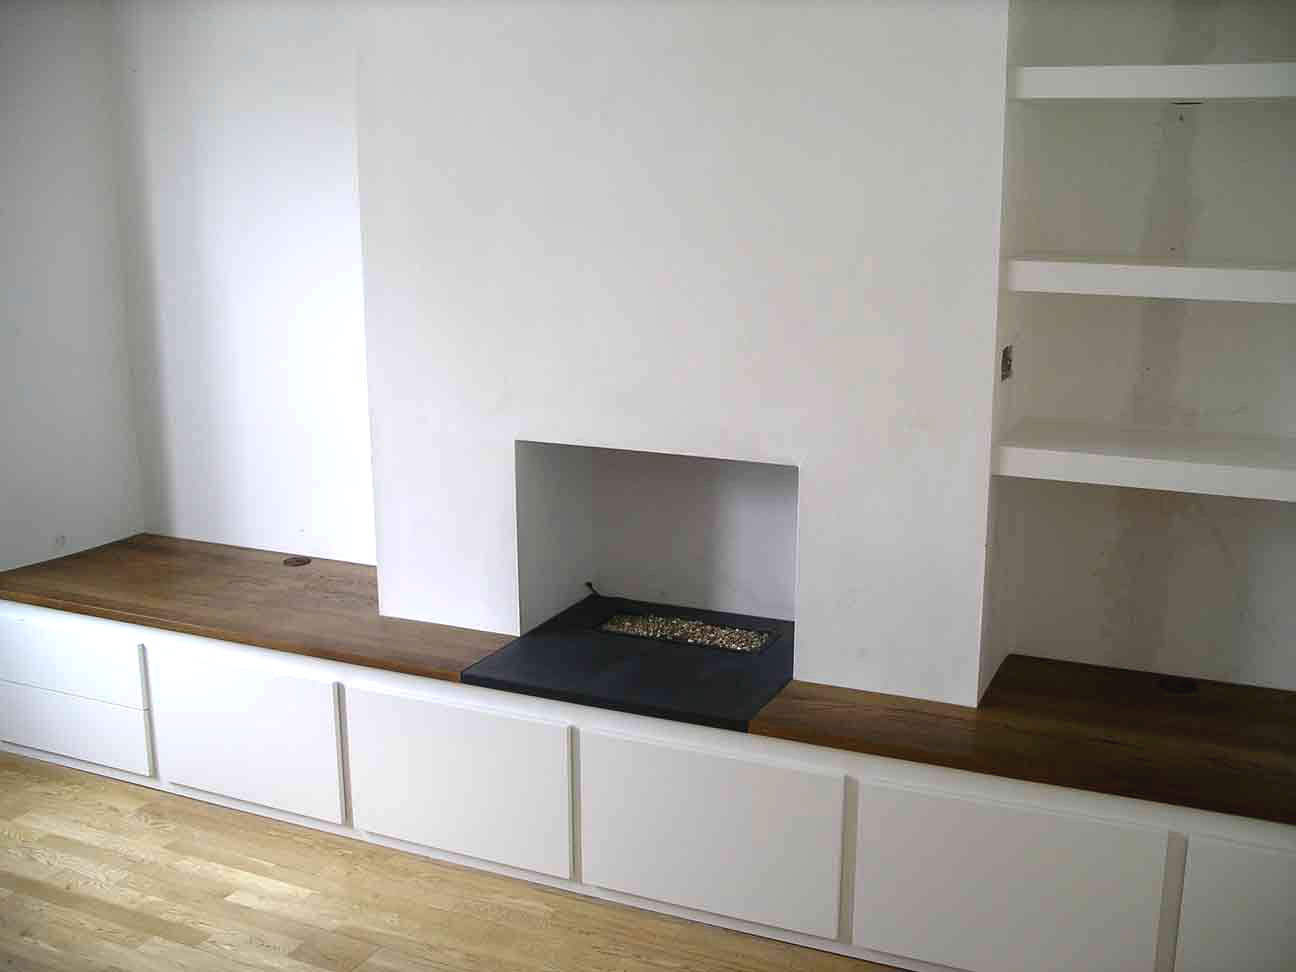 custom built cabinet spans chimney breast and alcoves